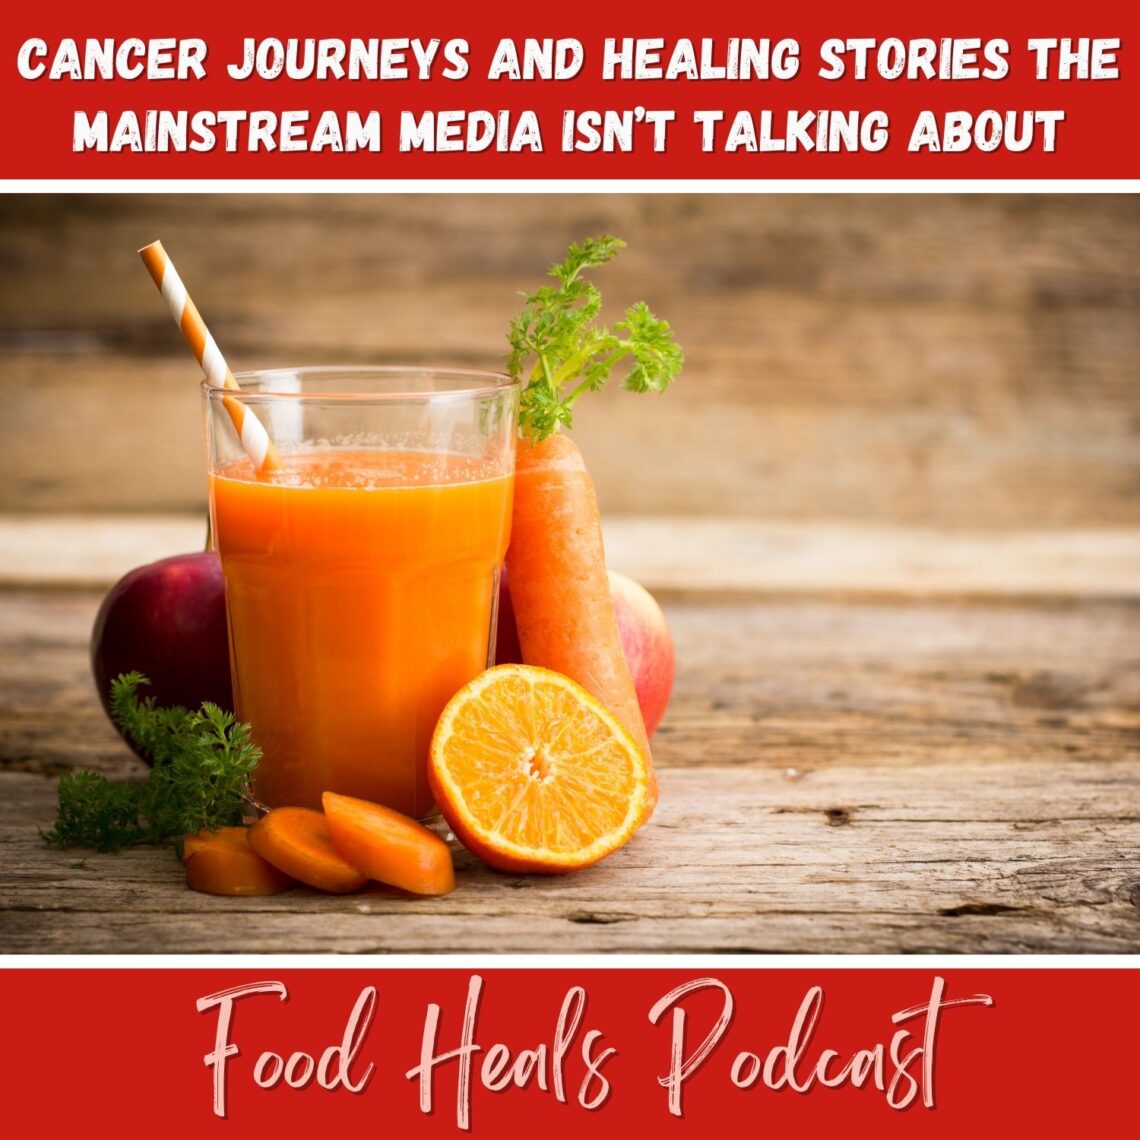 Cancer Journeys and Healing Stories the Mainstream Media Isn’t Talking About Part 2 of The Food Heals Podcast